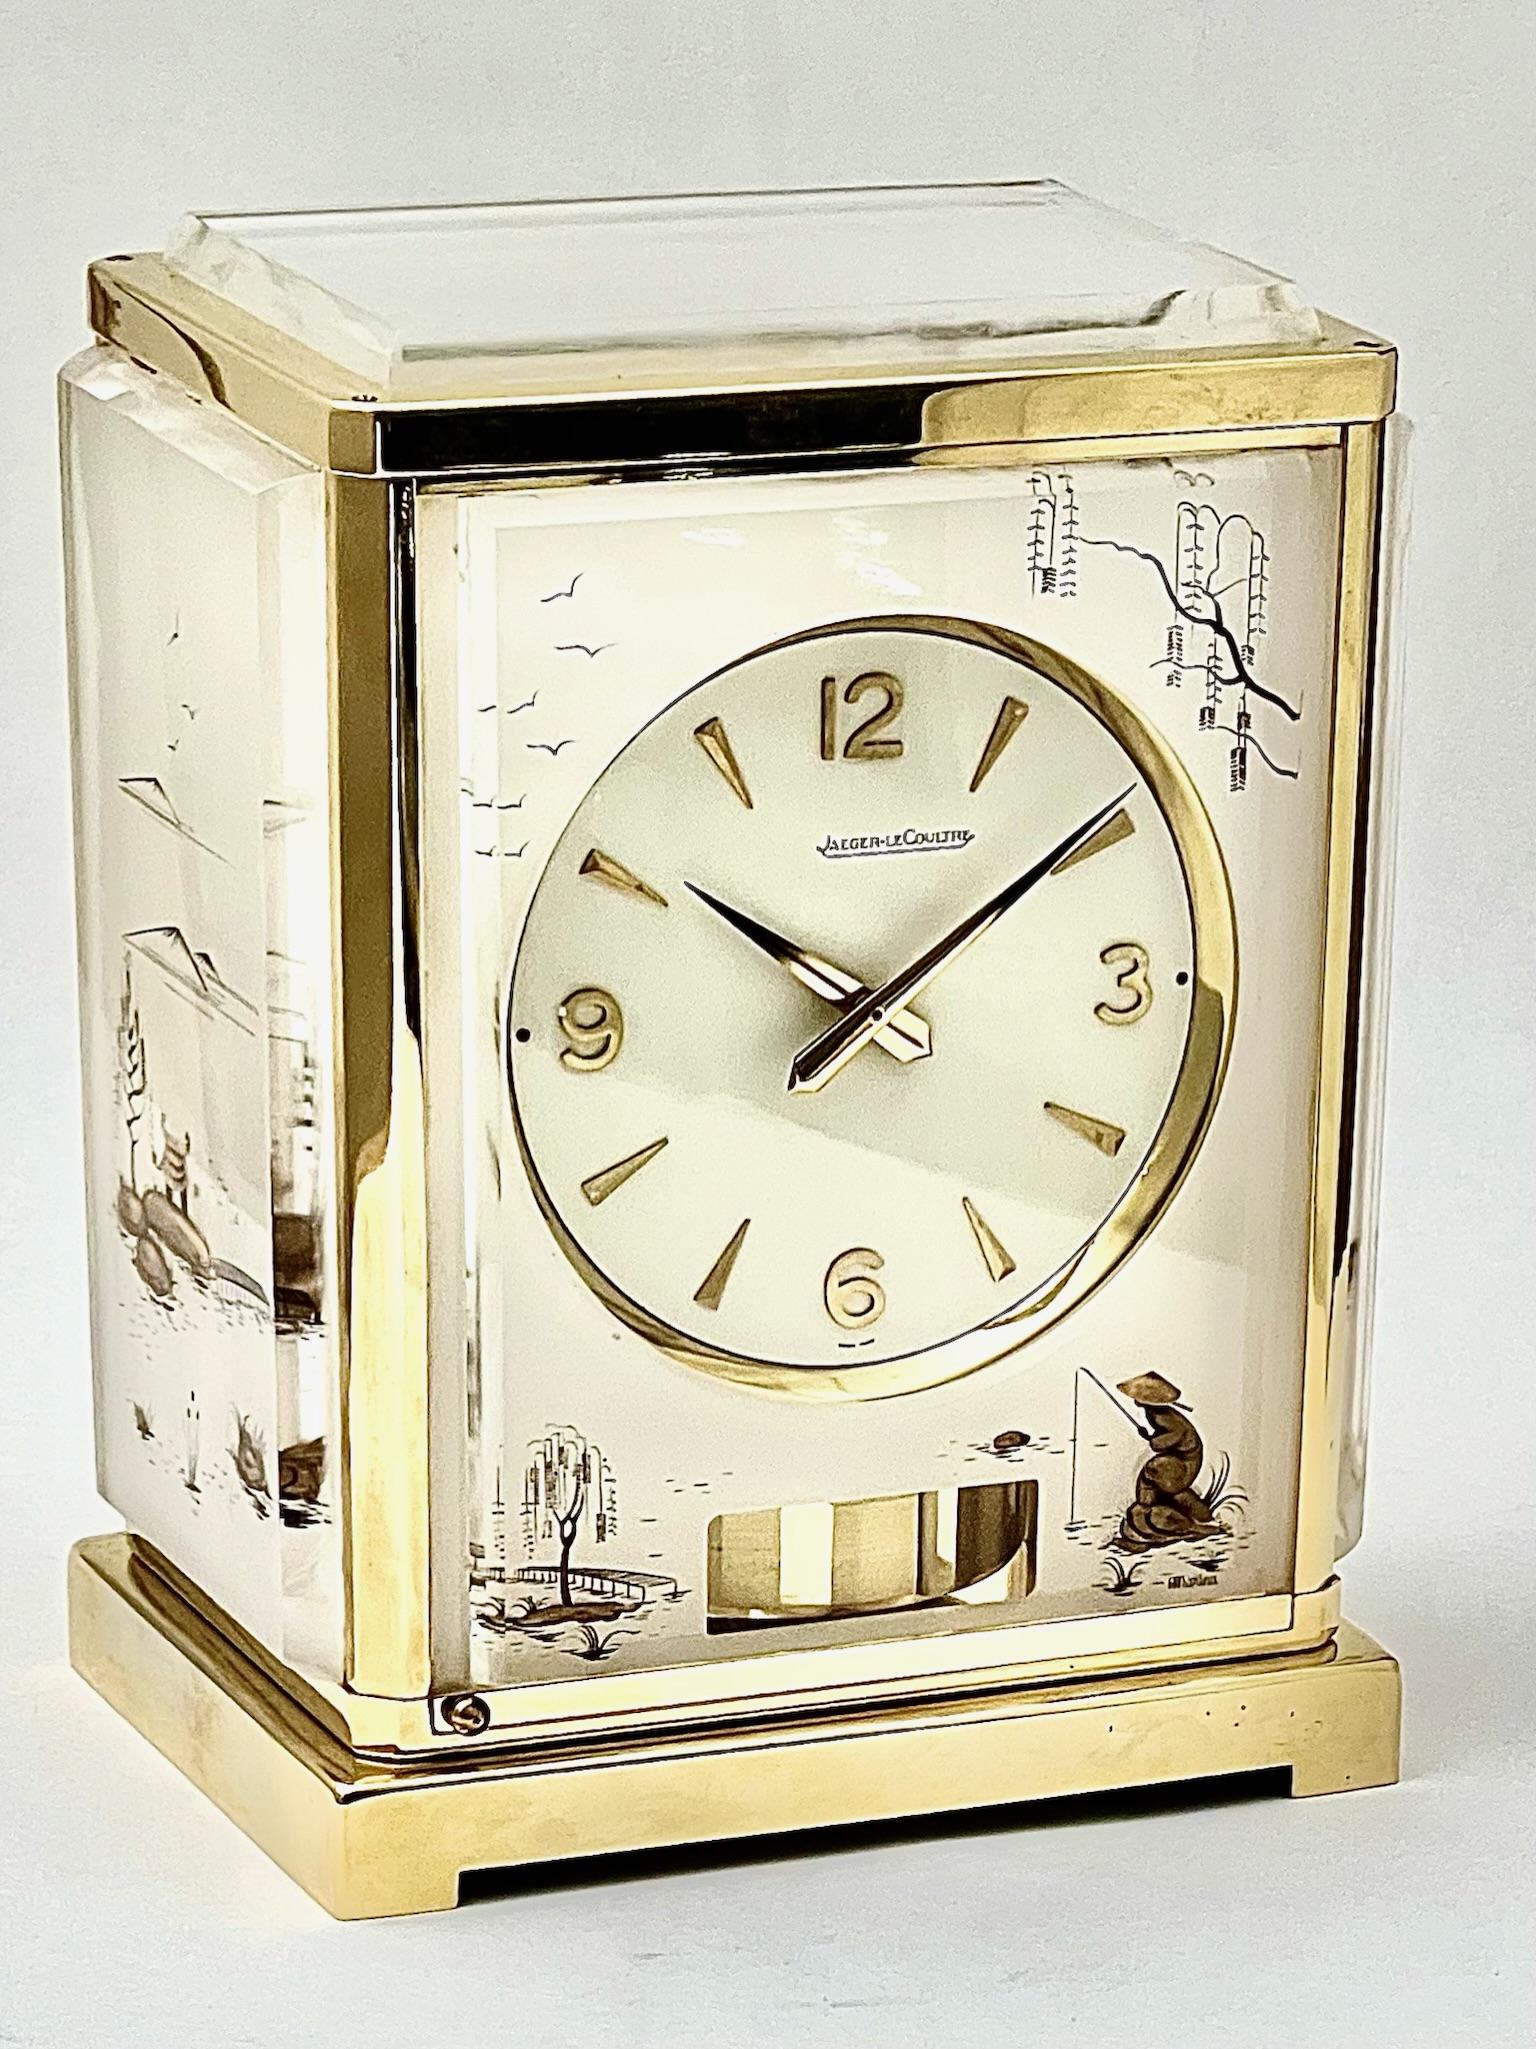 A stunning Jaeger LeCoultre mid century Marina Atmos clock with an Oriental fisherman theme. This piece looks wonderful on a desk in a study, or on a mantelpiece or table.

Nicknamed the 'President’s Clock,' Atmos clock are genuine icons of style